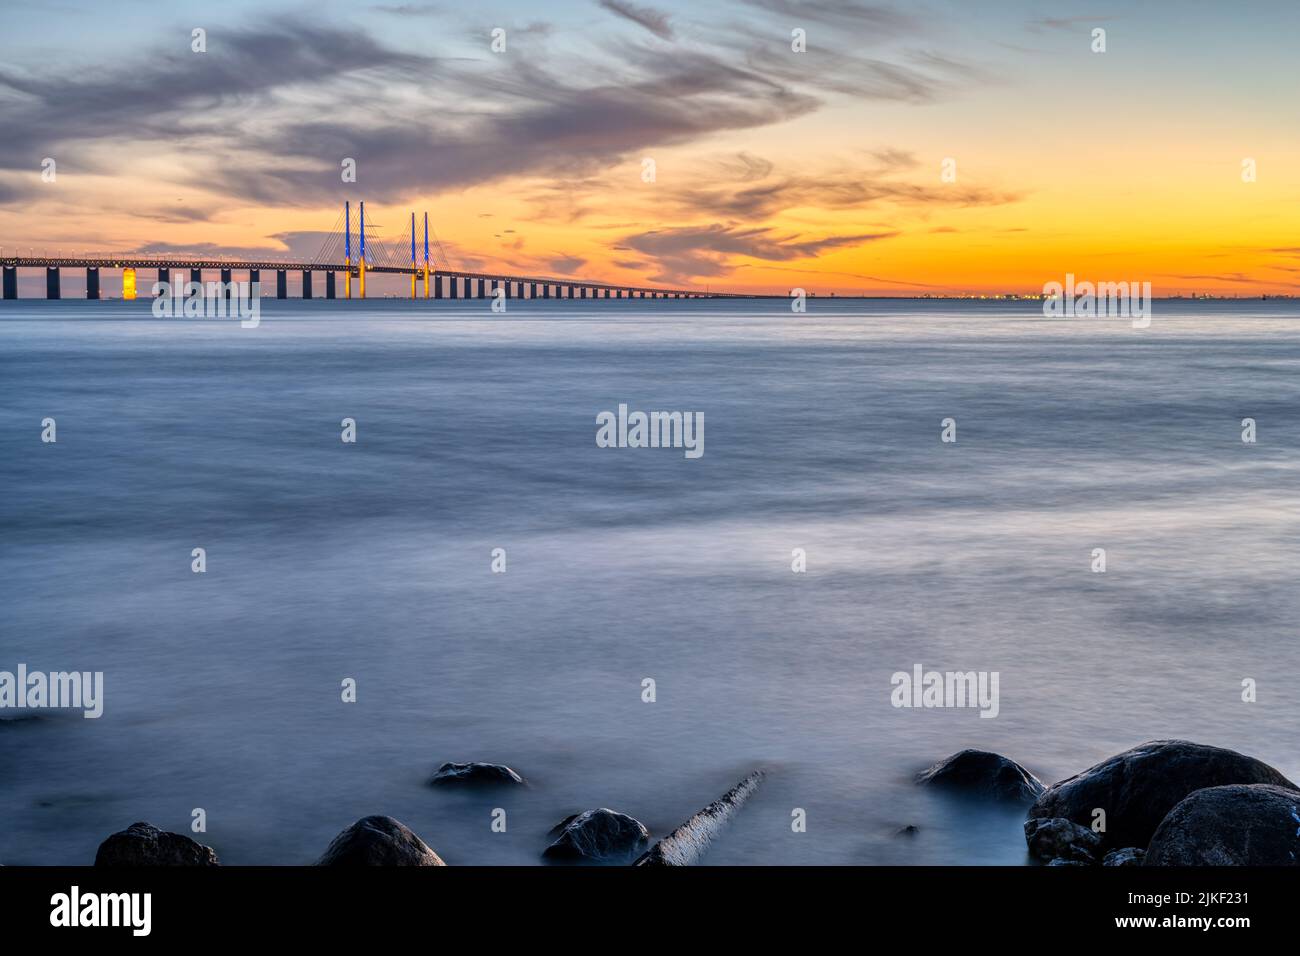 The Oresund between Denmark and Sweden with the famous brigde after sunset Stock Photo